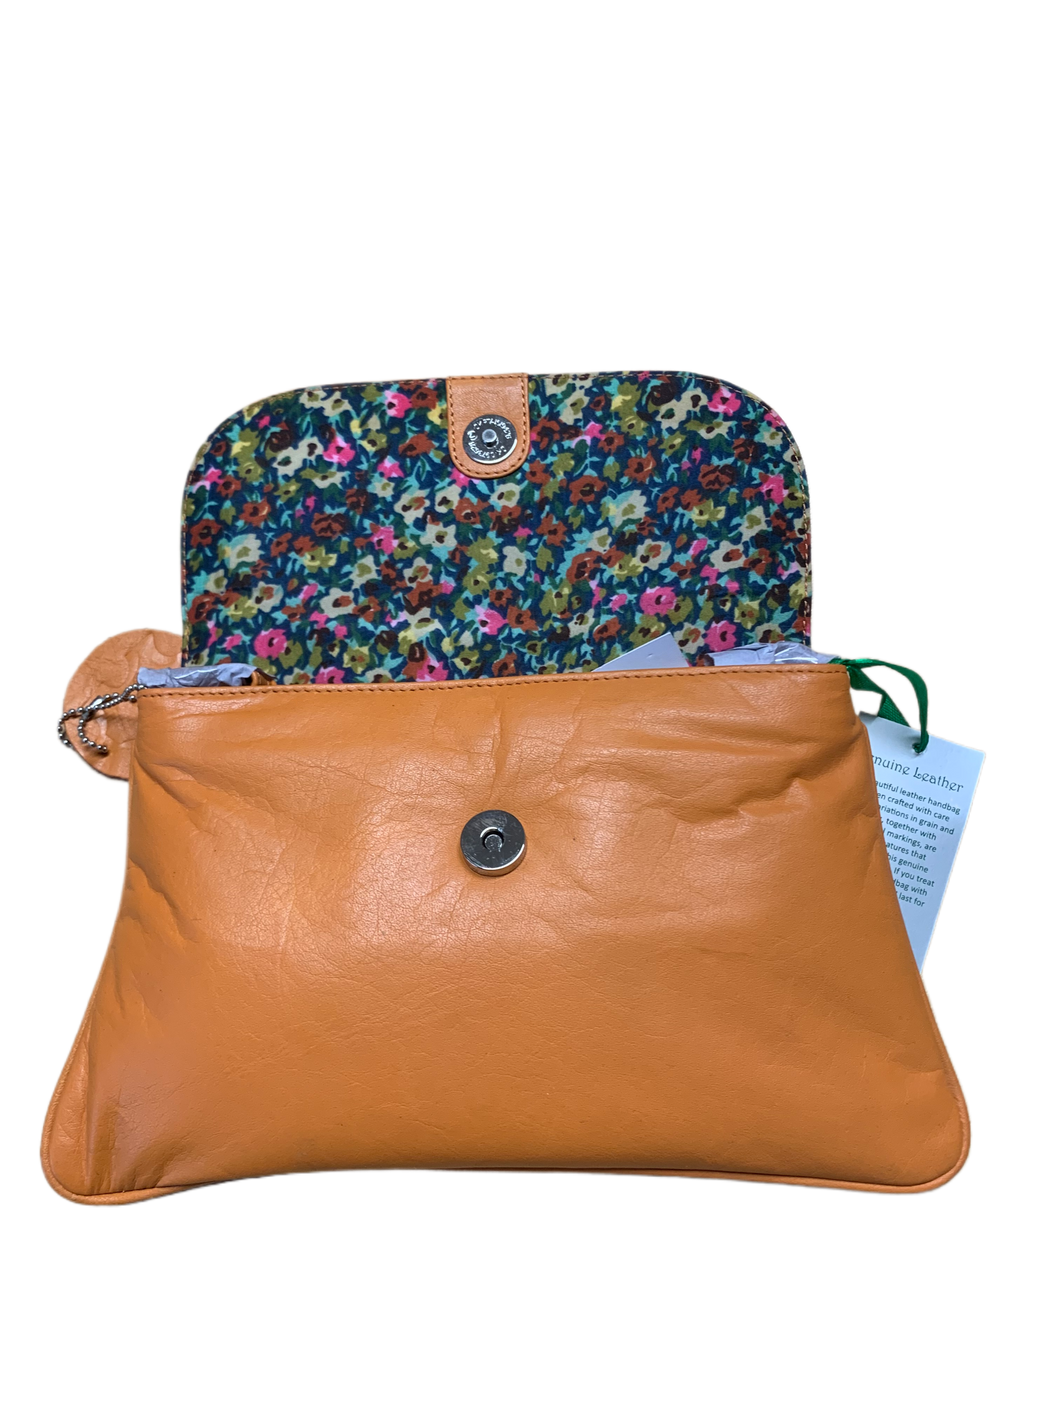 Small Shoulder Bag in paprika with floral ditsy lining